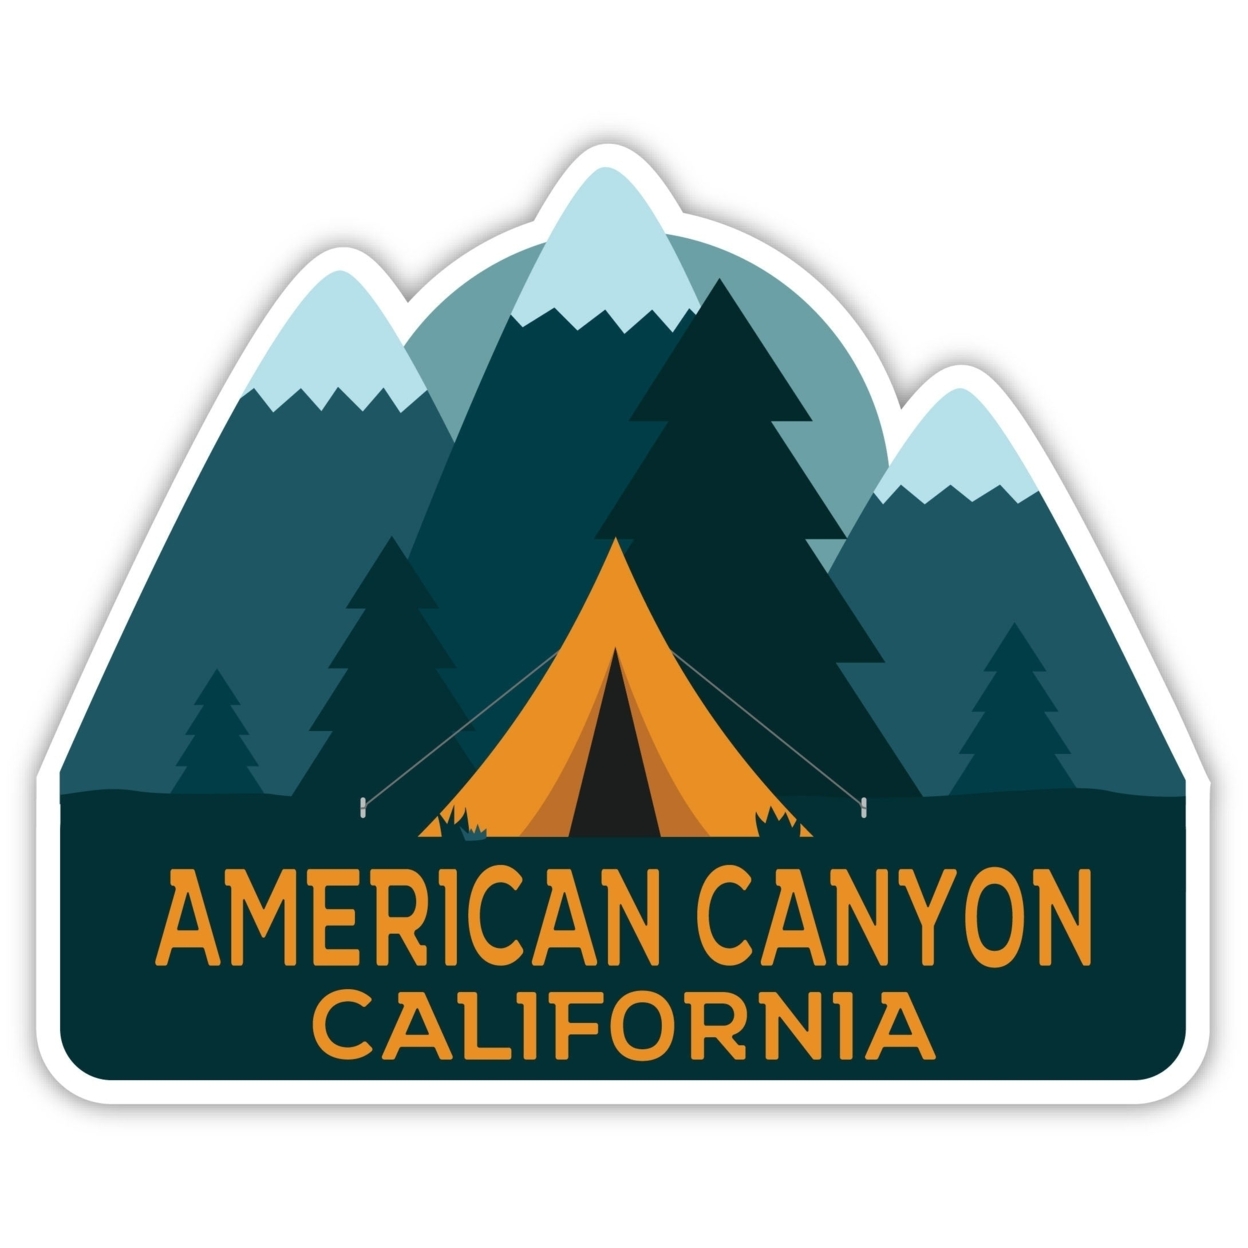 American Canyon California Souvenir Decorative Stickers (Choose Theme And Size) - 4-Pack, 6-Inch, Tent